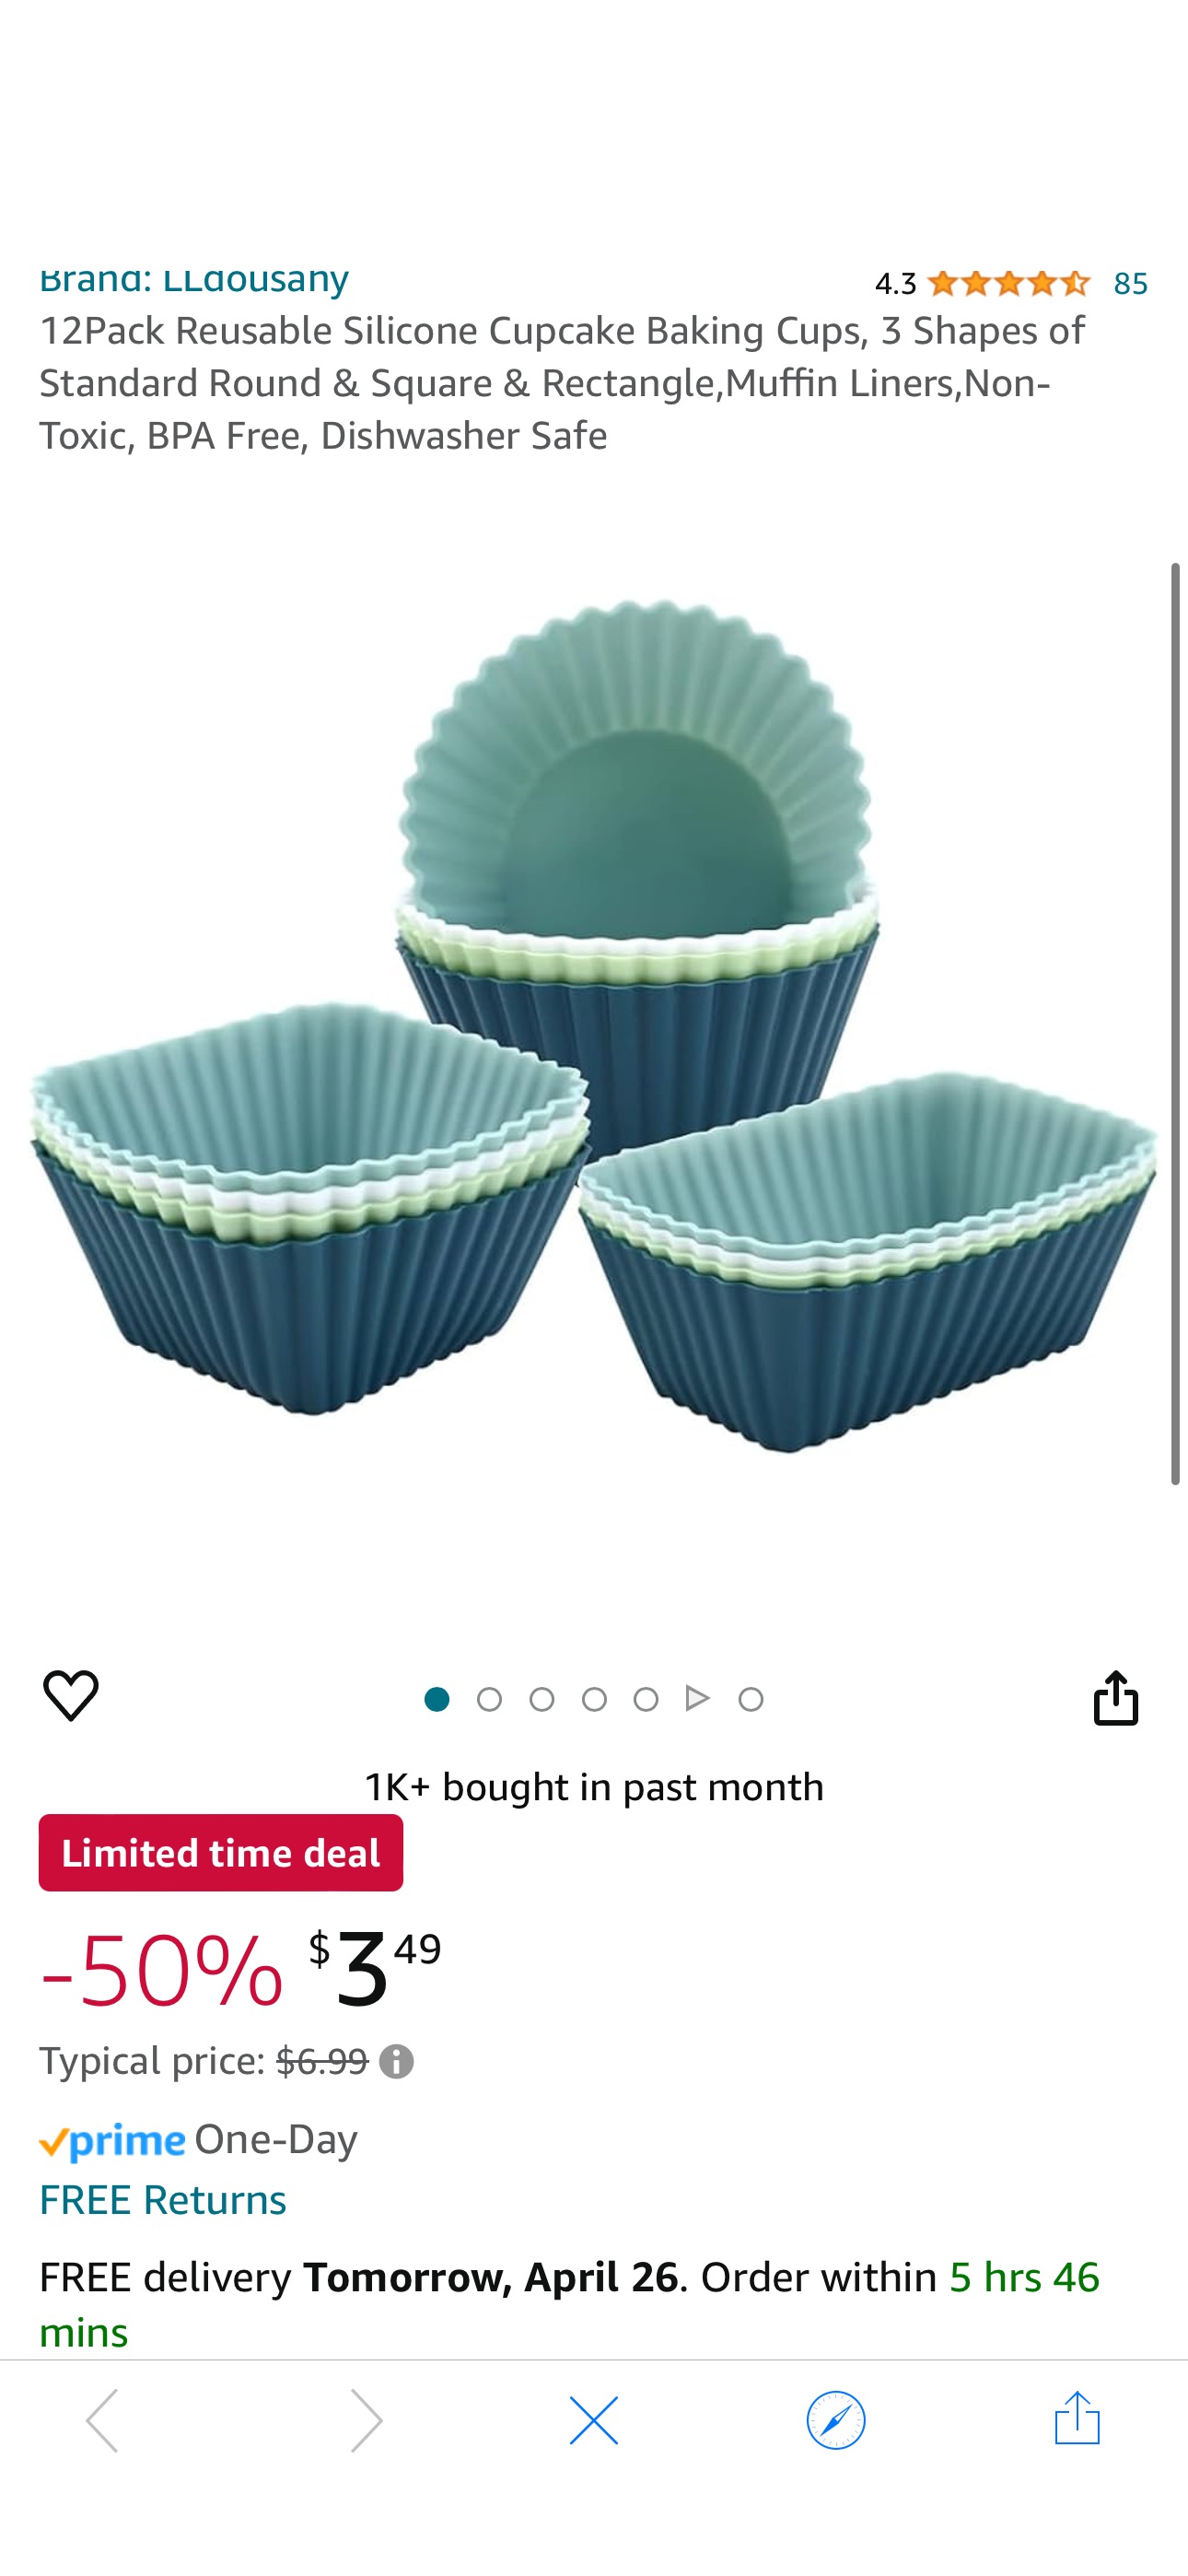 Amazon.com: LLdousahy 12Pack Reusable Silicone Cupcake Baking Cups, 3 Shapes of Standard Round & Square & Rectangle,Muffin Liners,Non-Toxic, BPA Free, Dishwasher Safe: Home & Kitchen